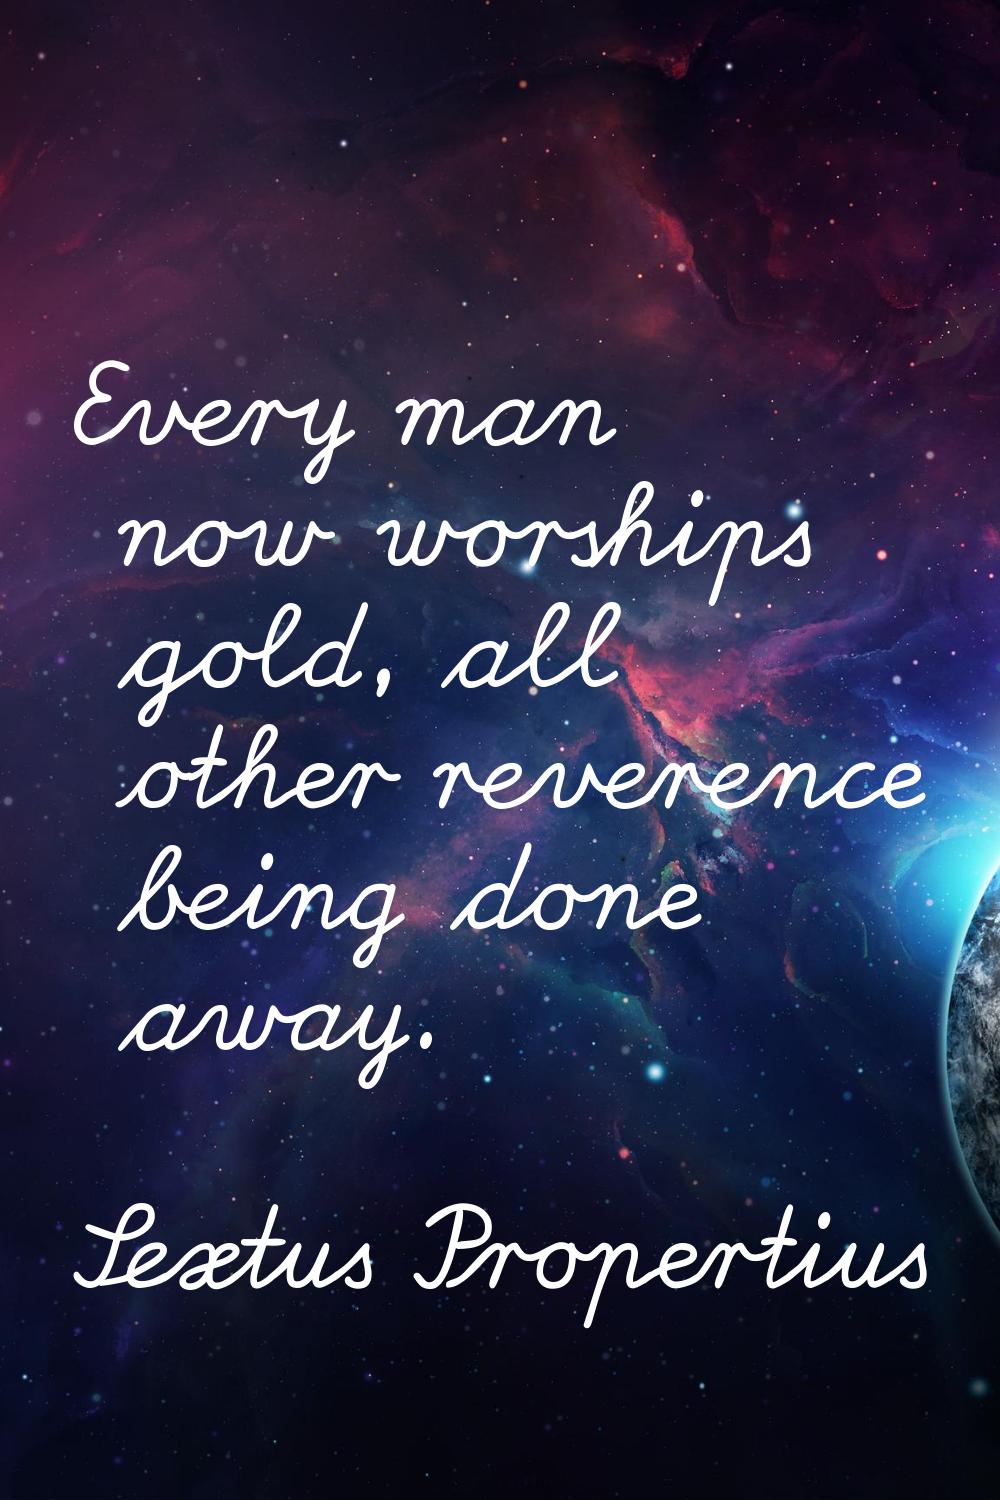 Every man now worships gold, all other reverence being done away.